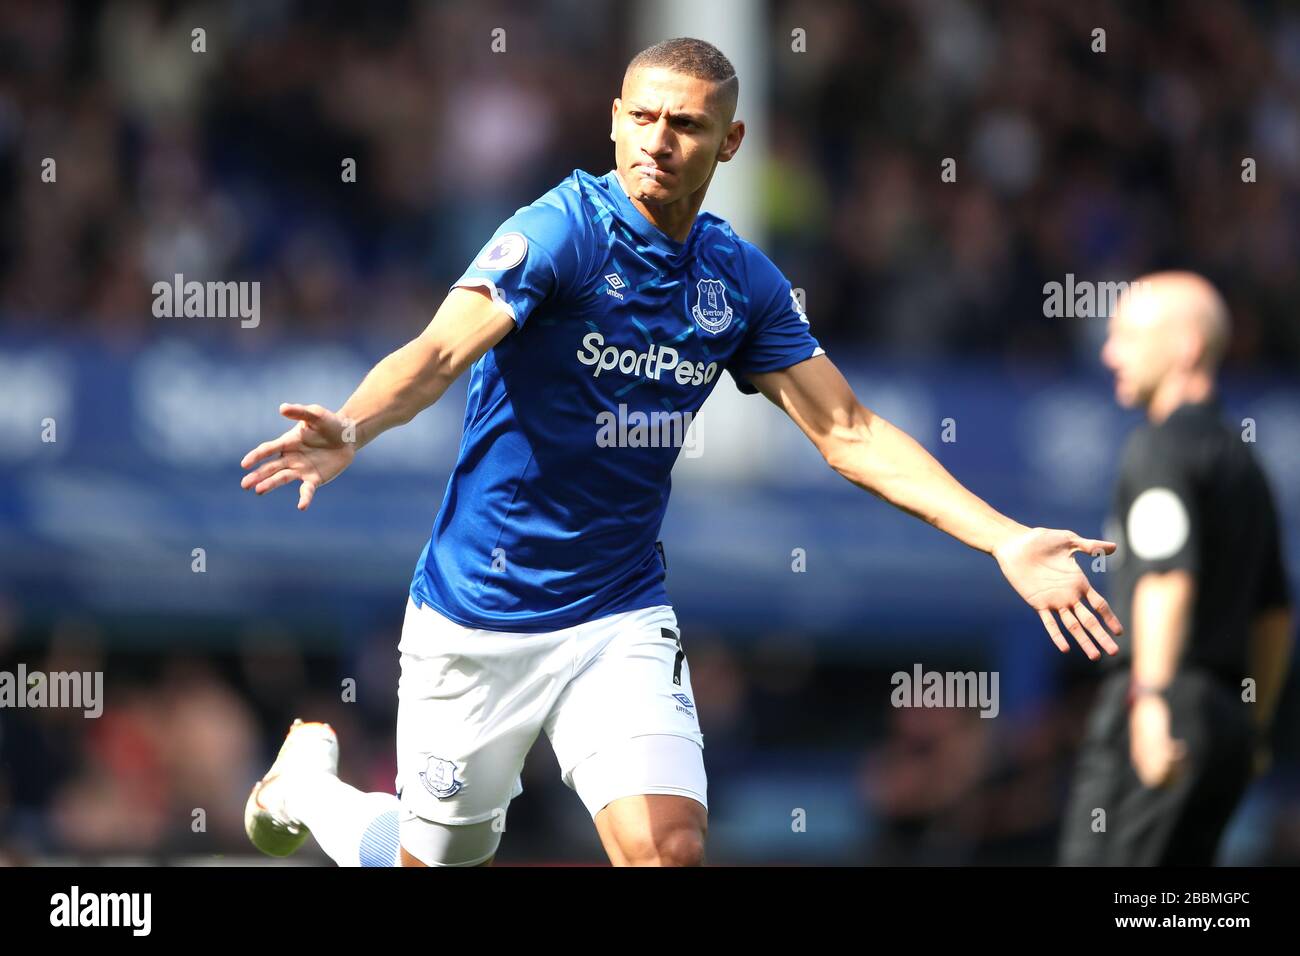 Everton's Richarlison celebrates scoring his side's first goal of the game from a mistake from Stock Photo